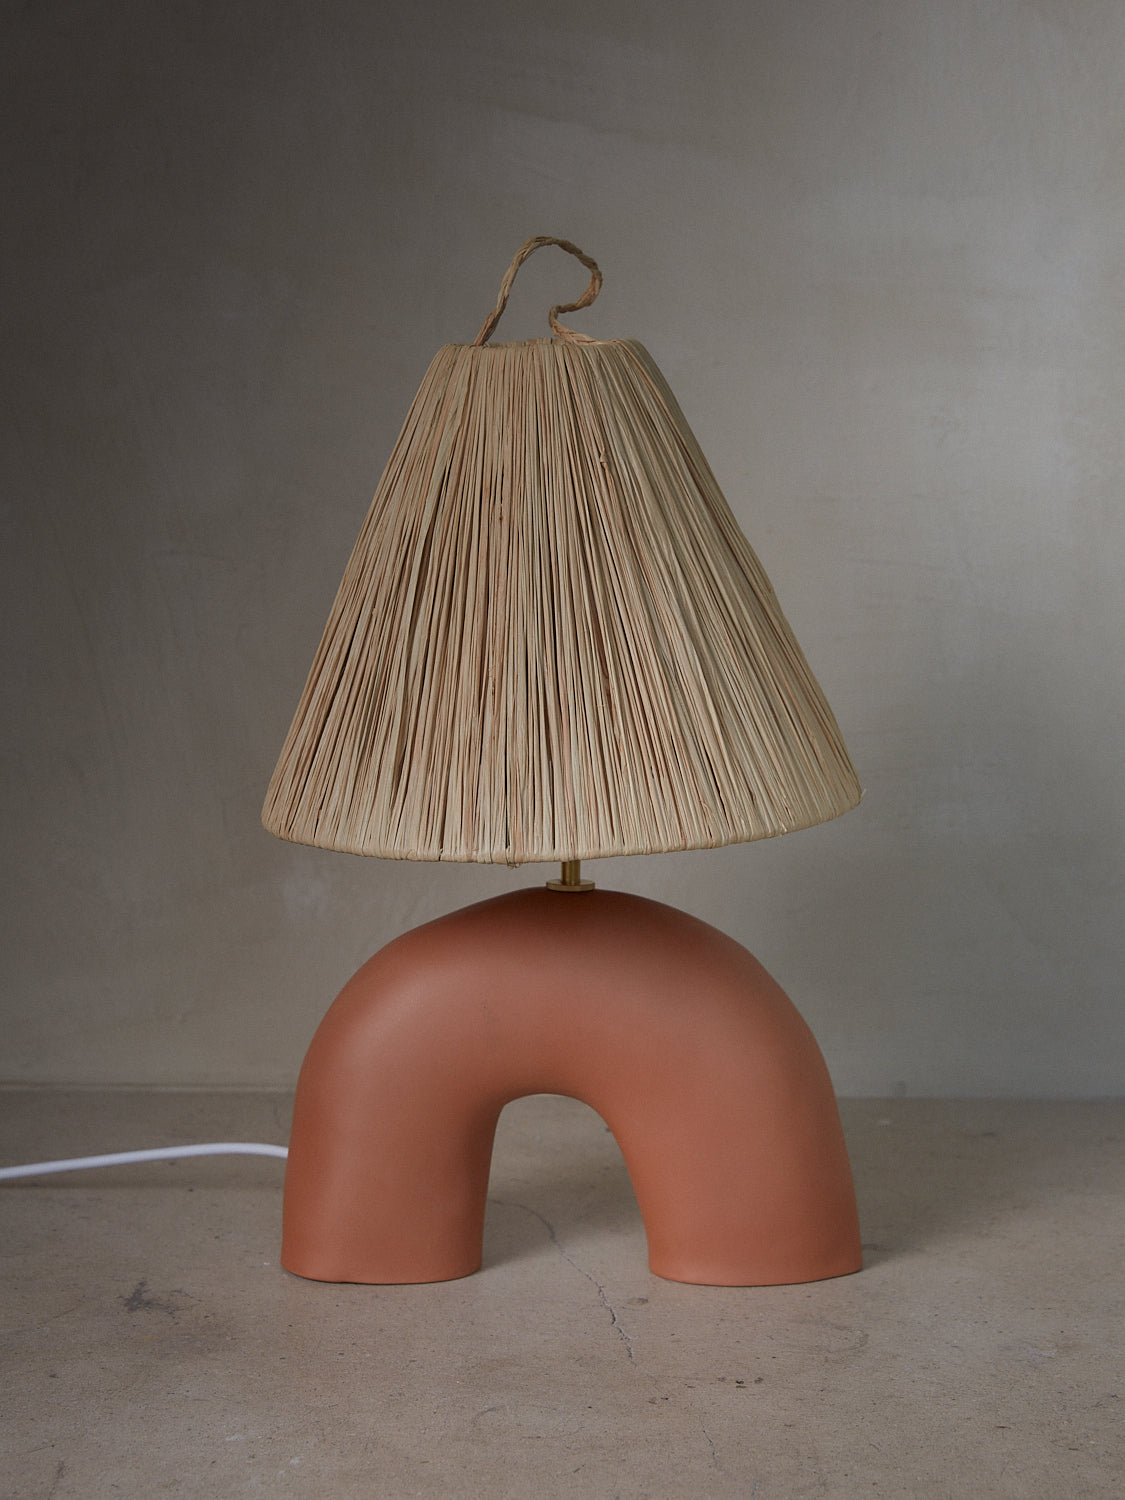 Terracotta Volta Lamp. Playful, handmade terracotta lamp with a burnished finish, brass hardware, cotton wiring and charming raffia shade